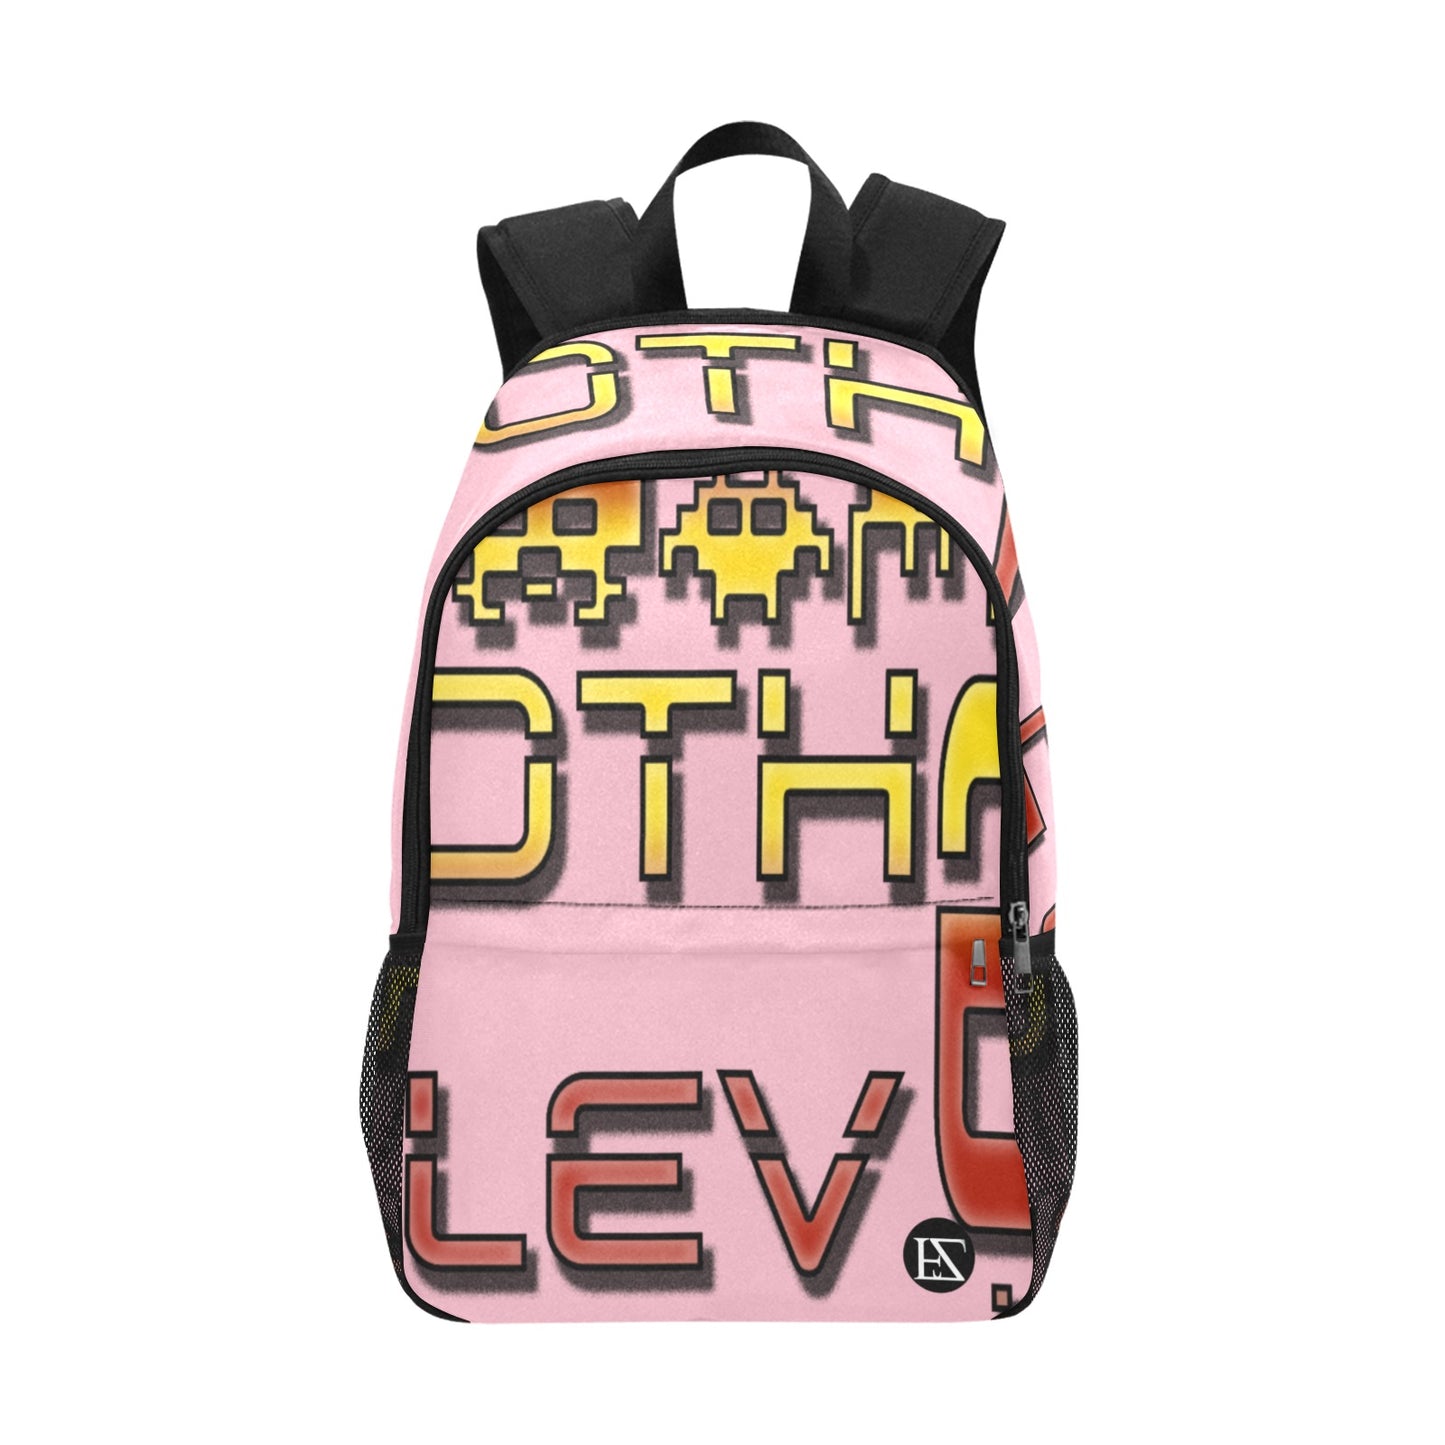 fz red levels backpack one size / fz levels backpack - pink all-over print unisex casual backpack with side mesh pockets (model 1659)